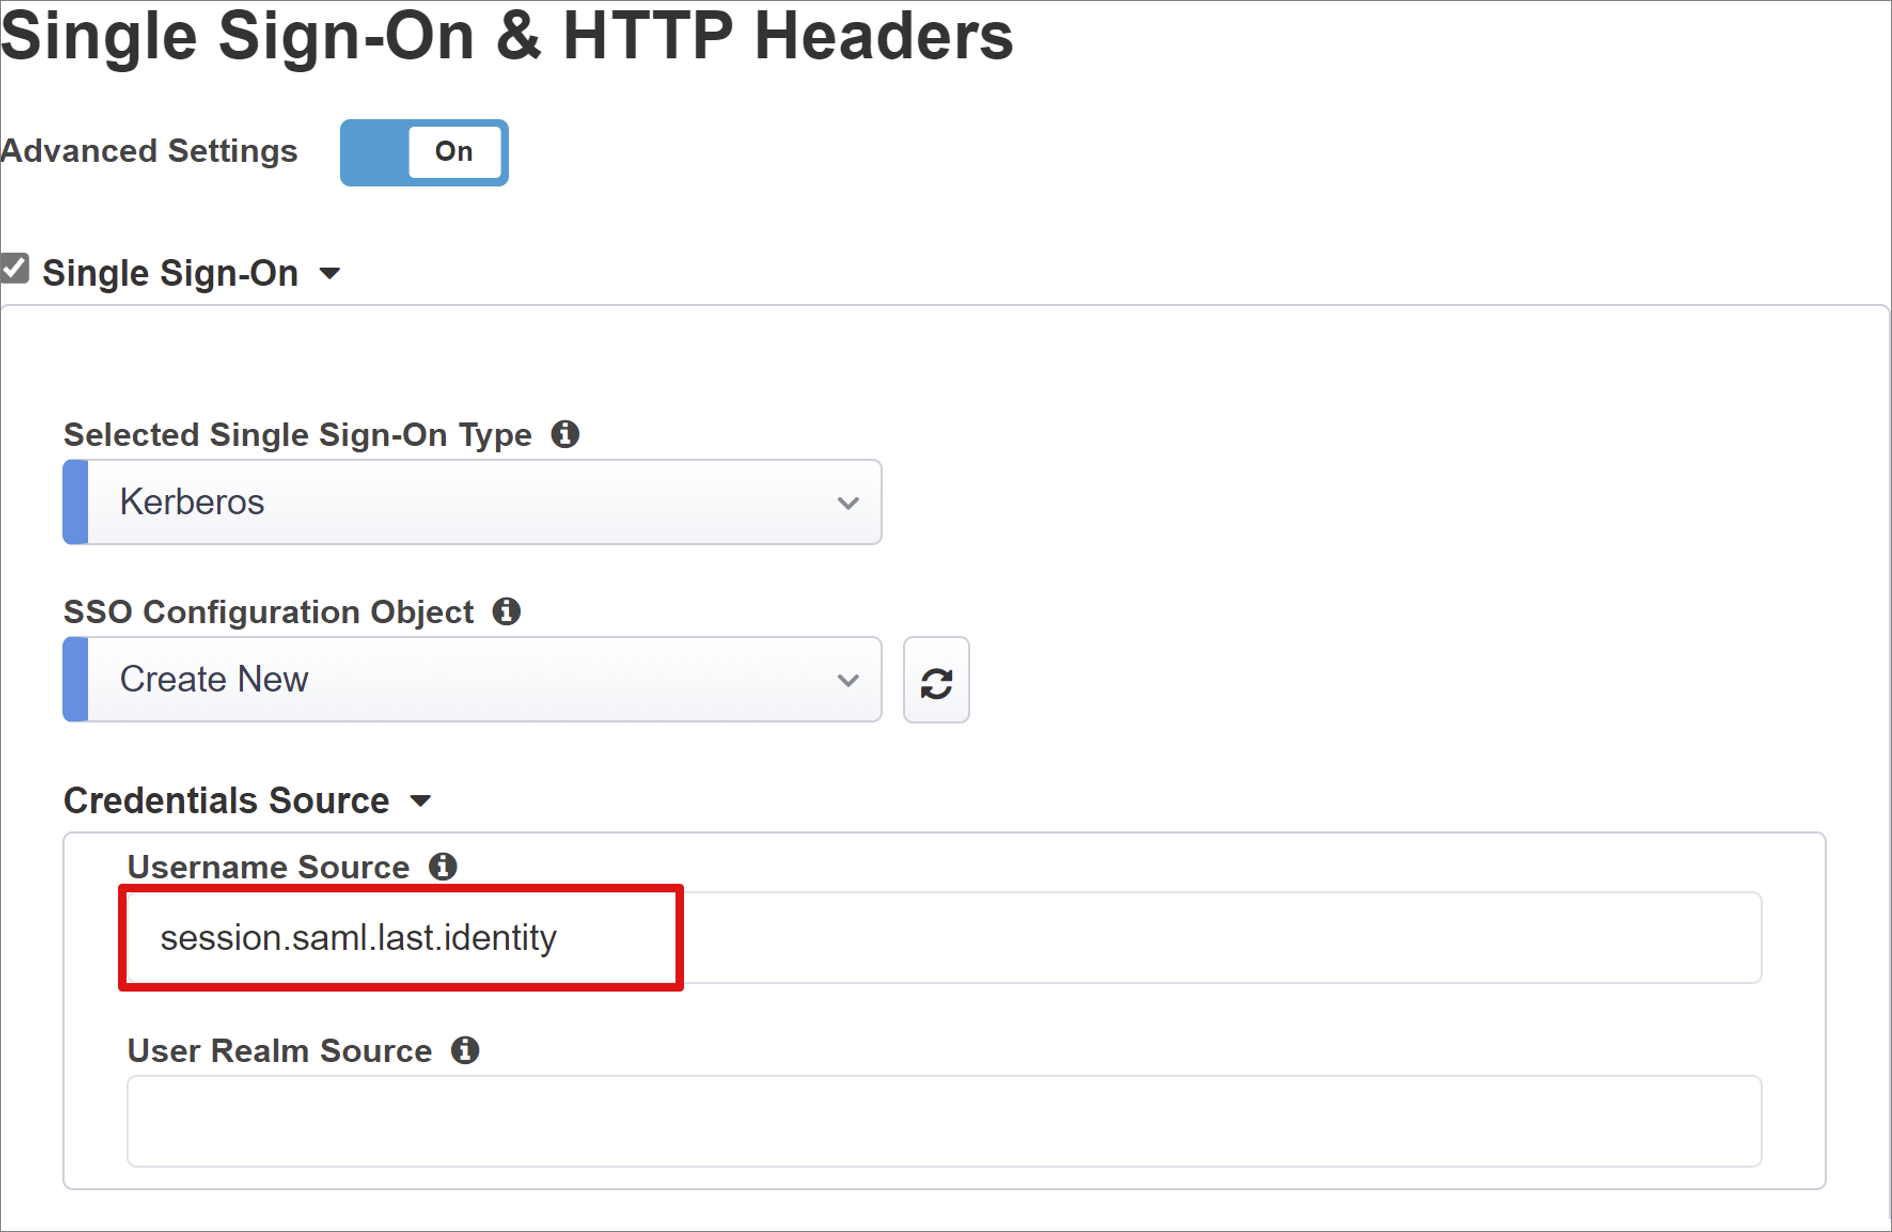 Screenshot of options and selections for Single Sign-On & HTTP Headers.